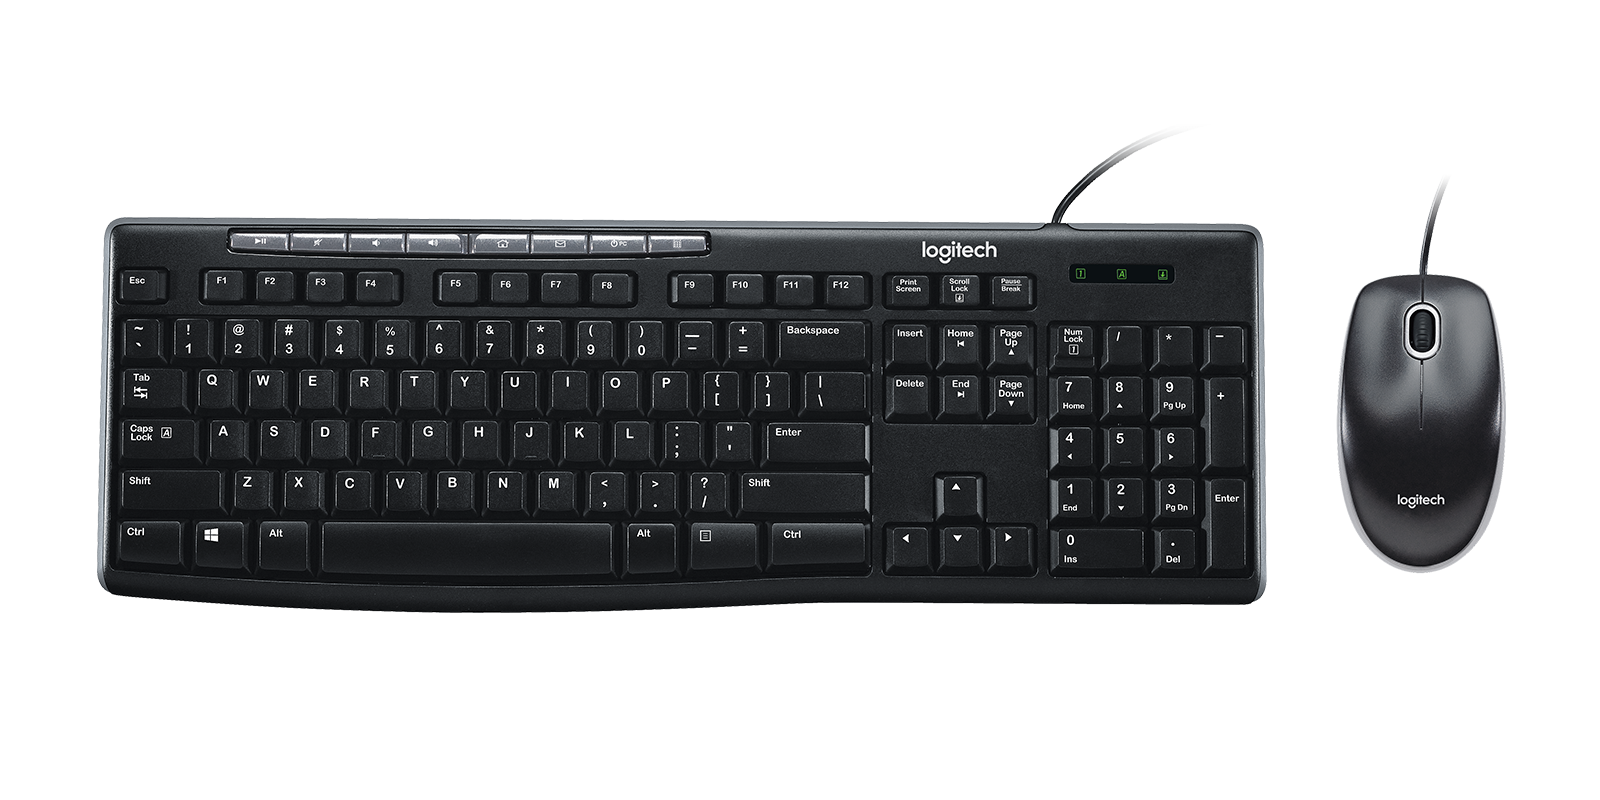 MK200 MEDIA CORDED KEYBOARD AND MOUSE COMBO For Sale in Trinidad